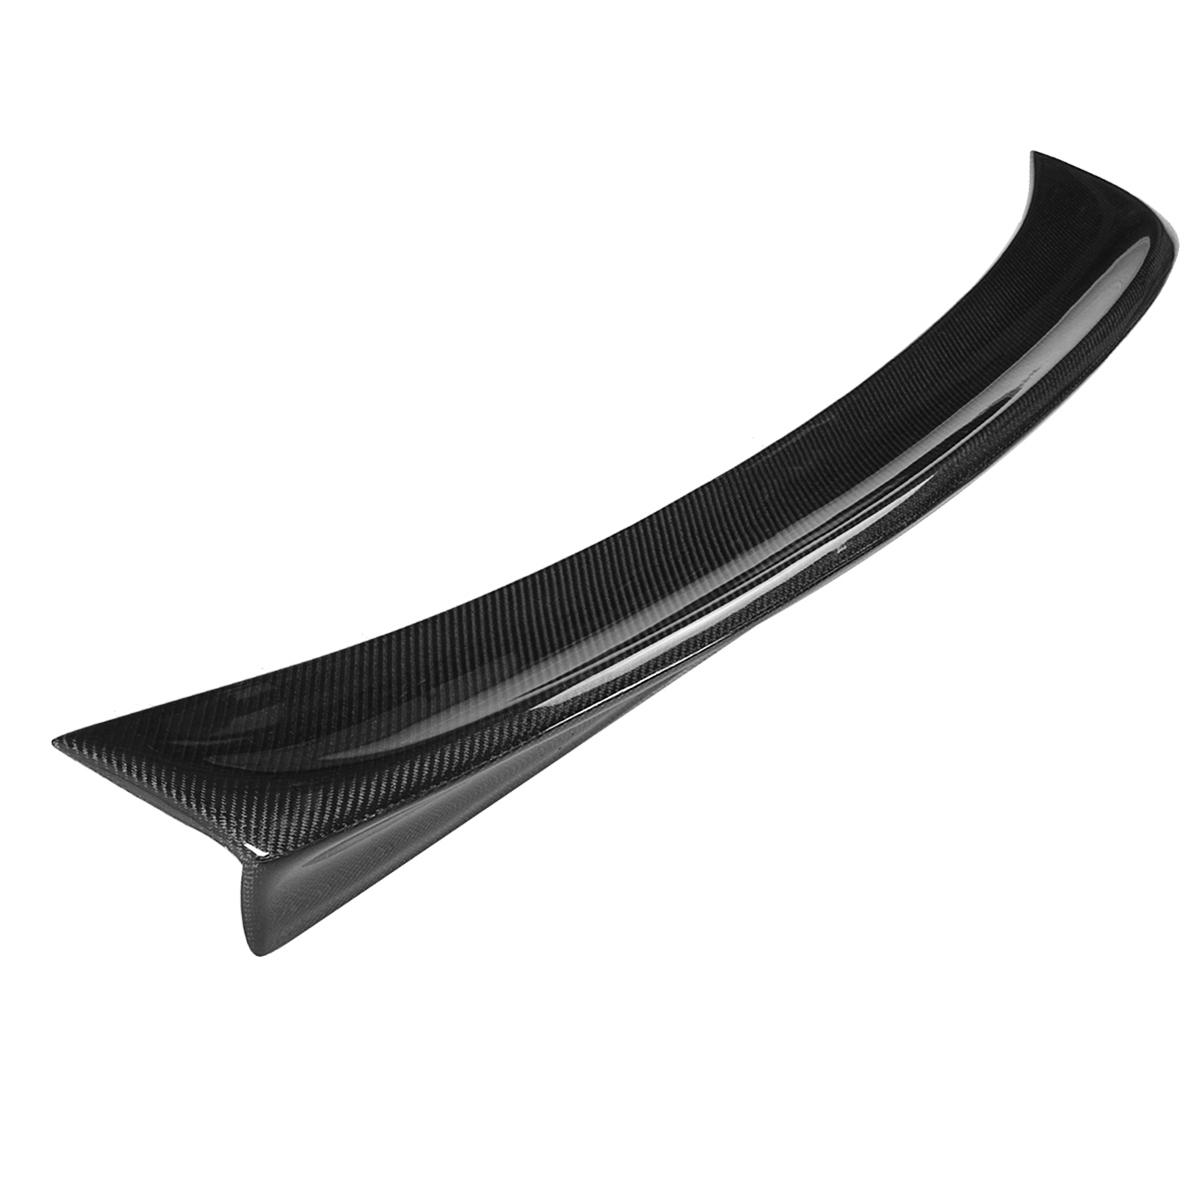 CSL Style Carbon Fiber Kofferdeksel Auto Spoiler Wing Voor BMW 2001-06 E46 3 SERIE & M3 COUPE